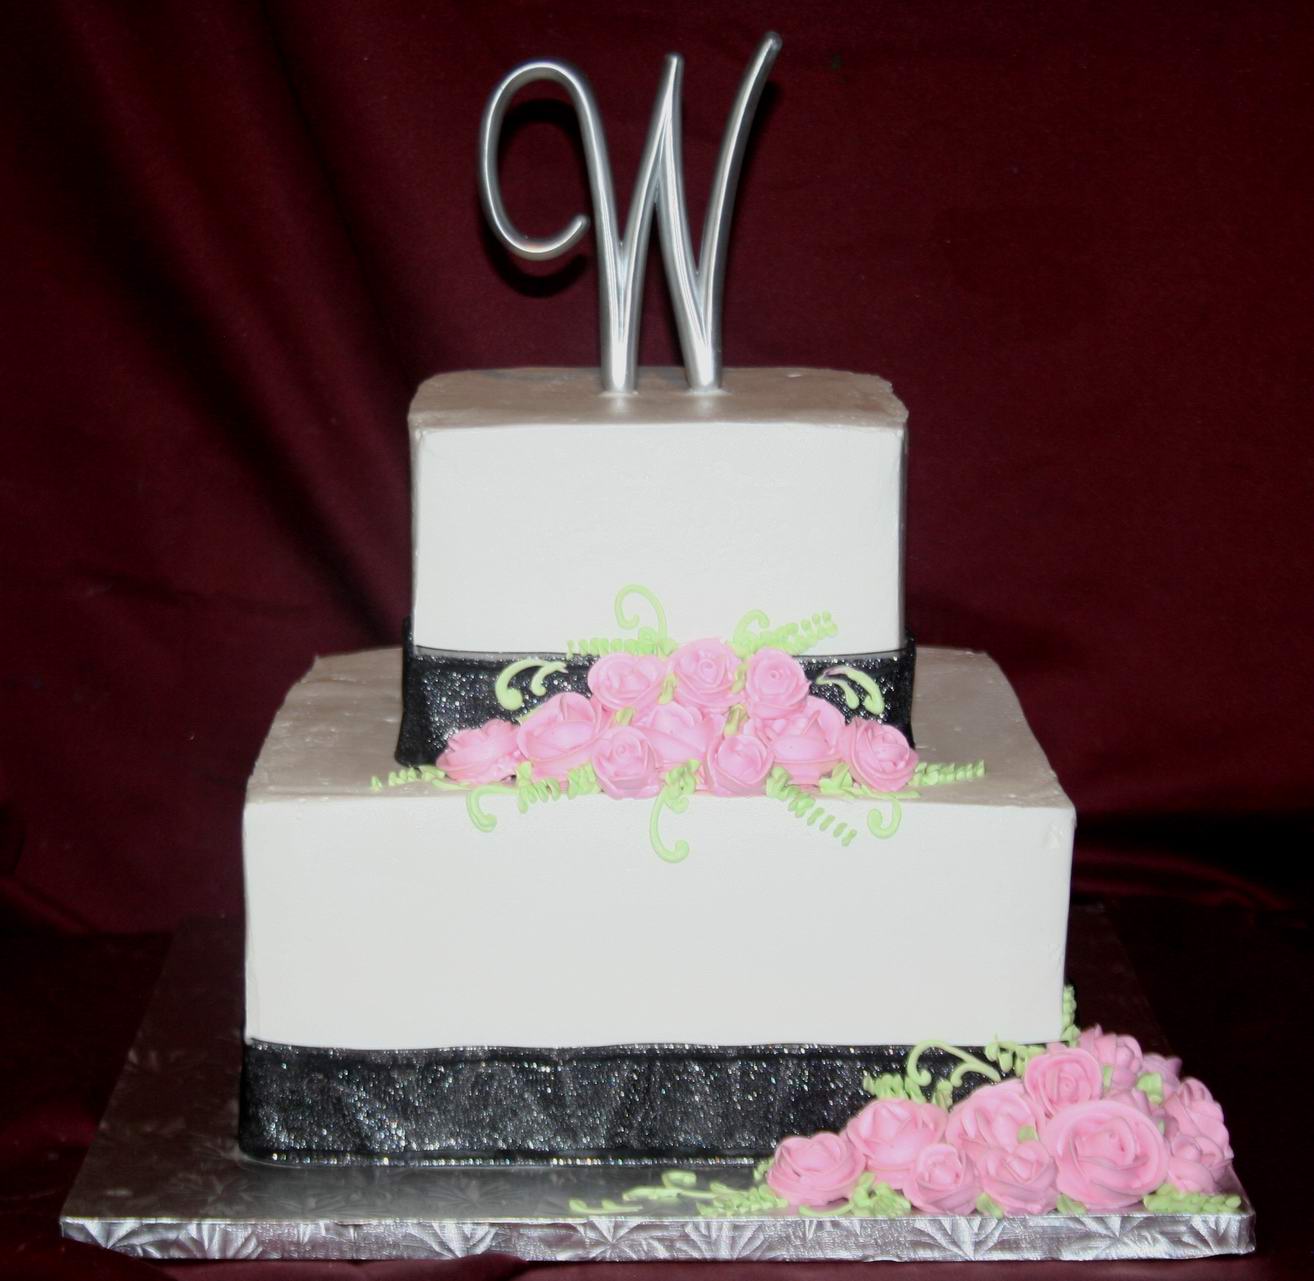 8 Tiered Square Buttercream Wedding Cakes Photo 2 Tier Square